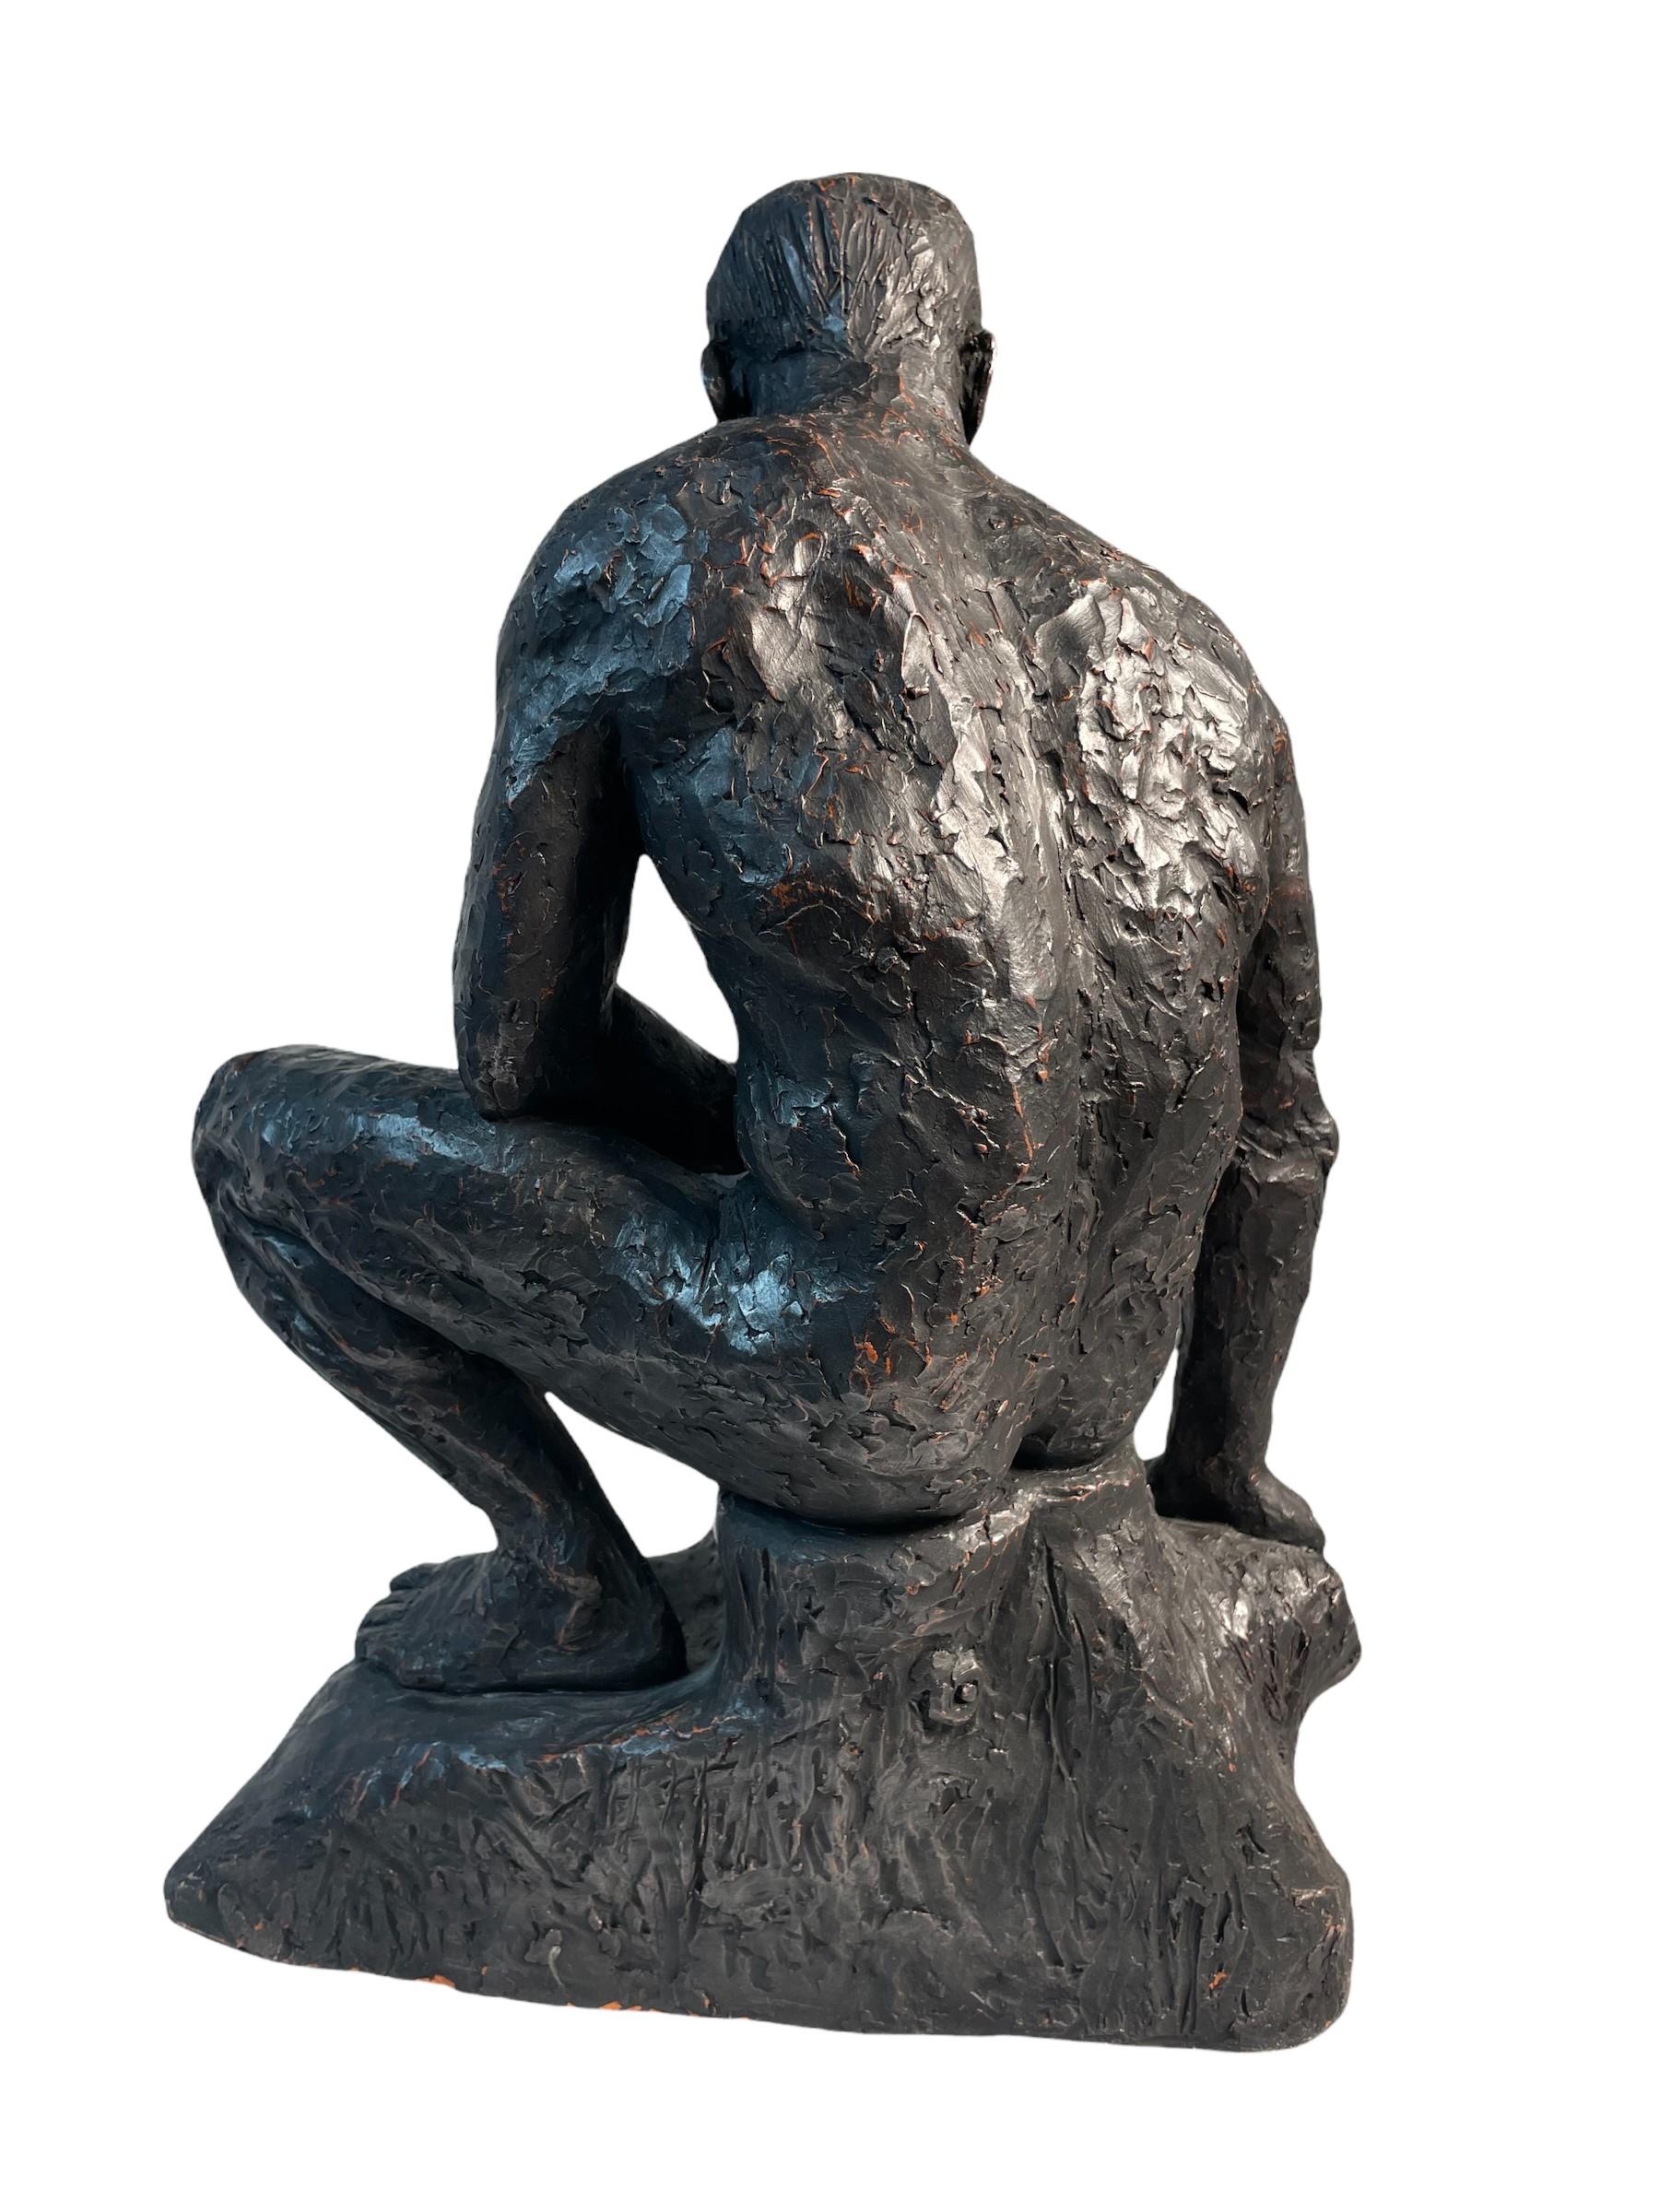 Large clay sculpture of the seated male form by contemporary British artist David T Waller. The clay is roughly shaped by hand giving it a textured appearance and is then painted black to heighten the modelled form and simulate the appearance of